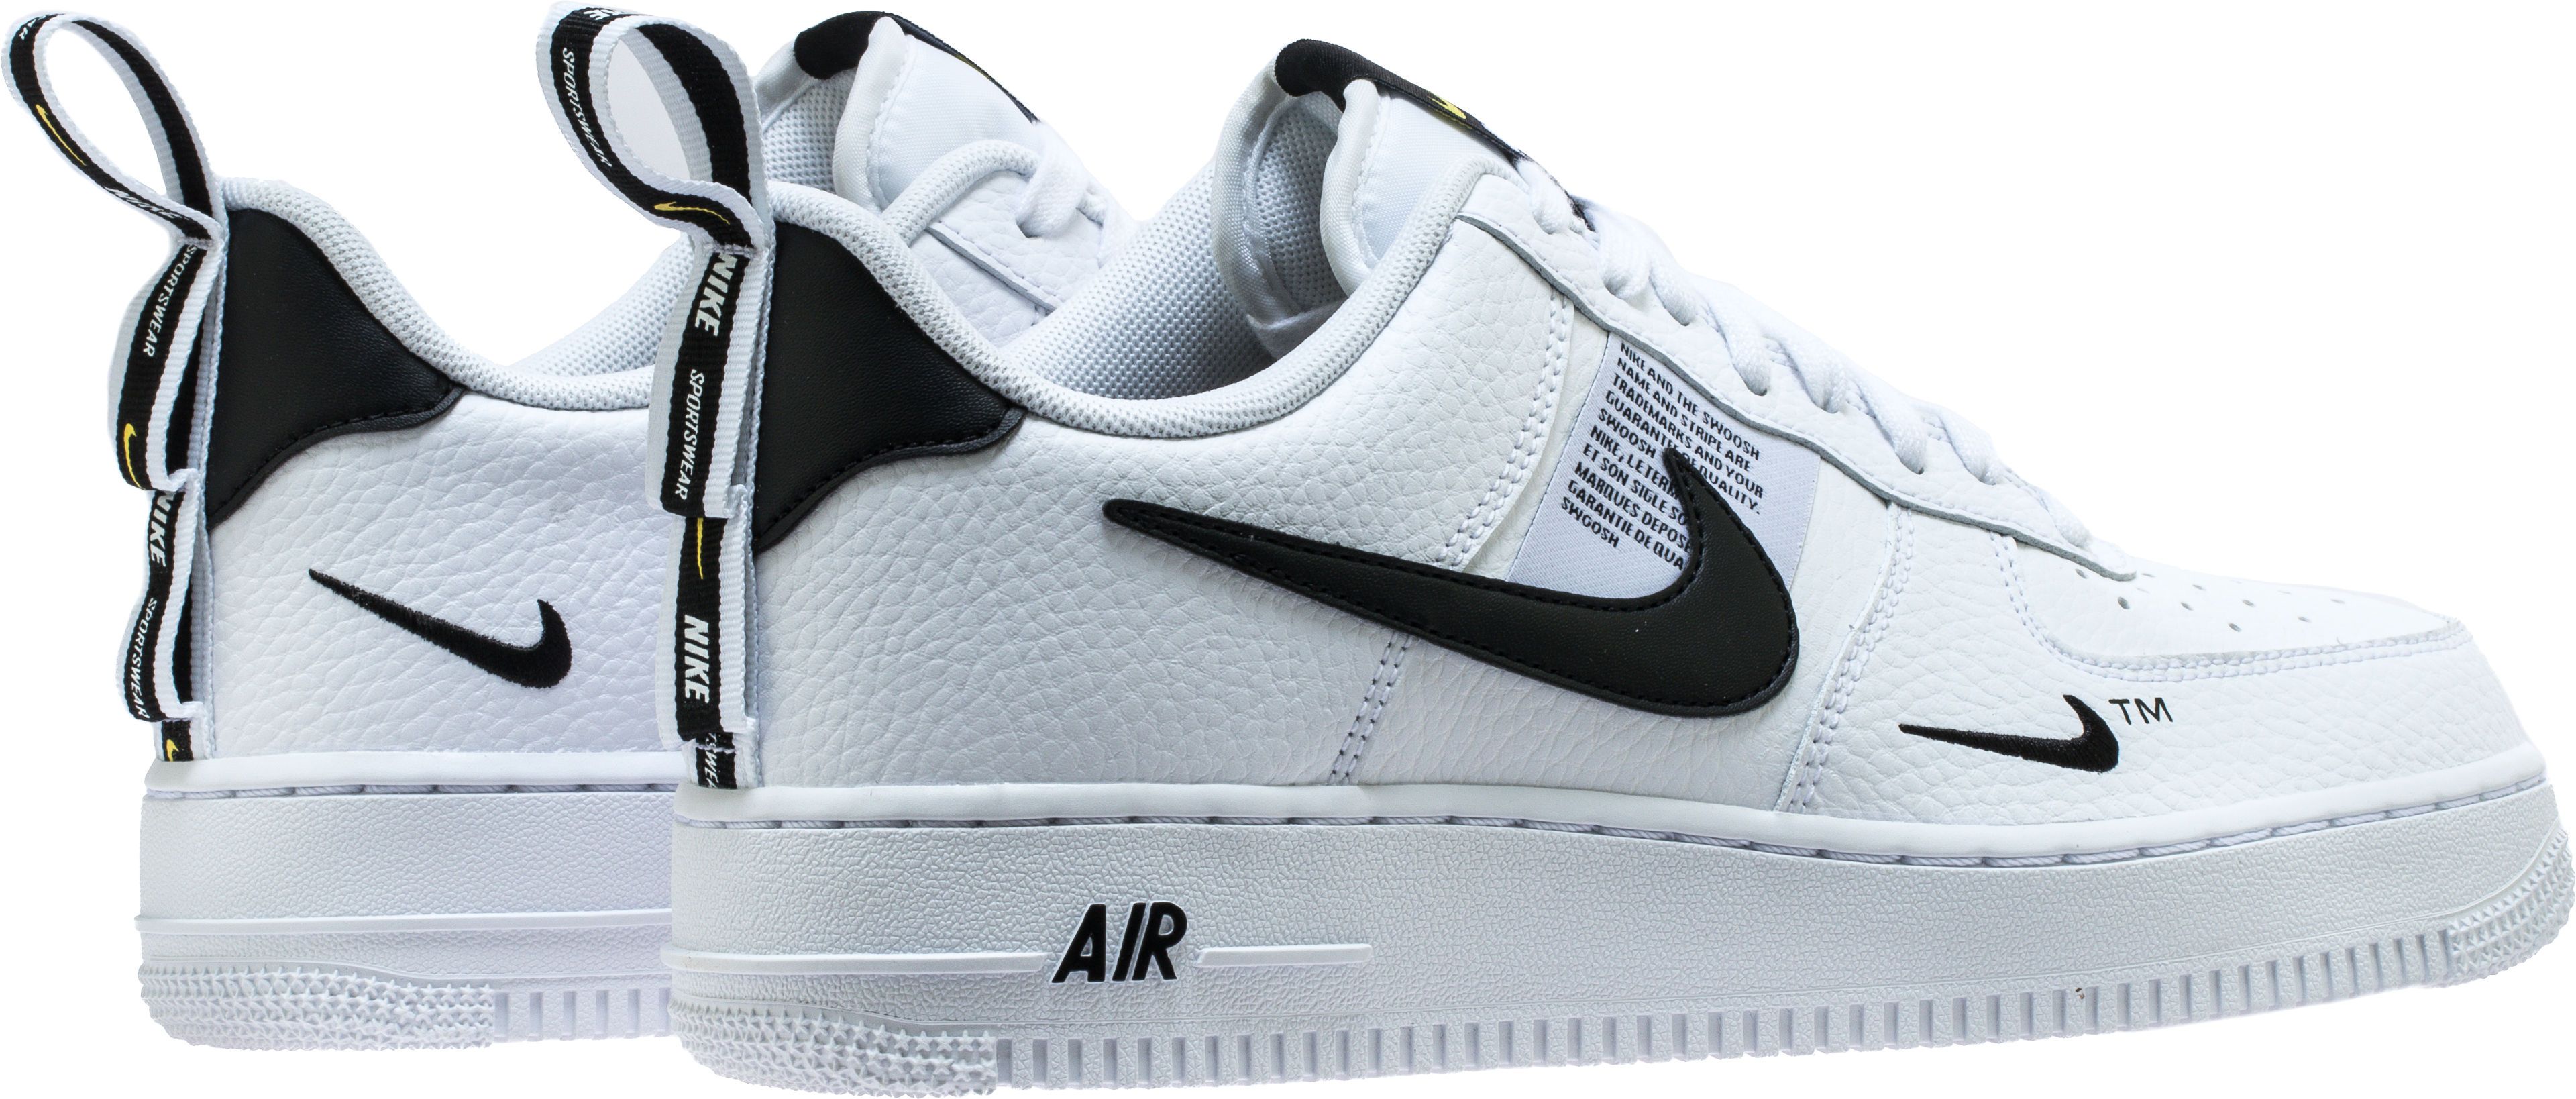 KicksFinder on Twitter: "Nike Air Force 1 '07 LV8 "White/Black" now available at Shoe Palace! https://t.co/LwnD8a8iyE &lt;&lt; Direct link https://t.co/ABEBTRn0lm" / Twitter